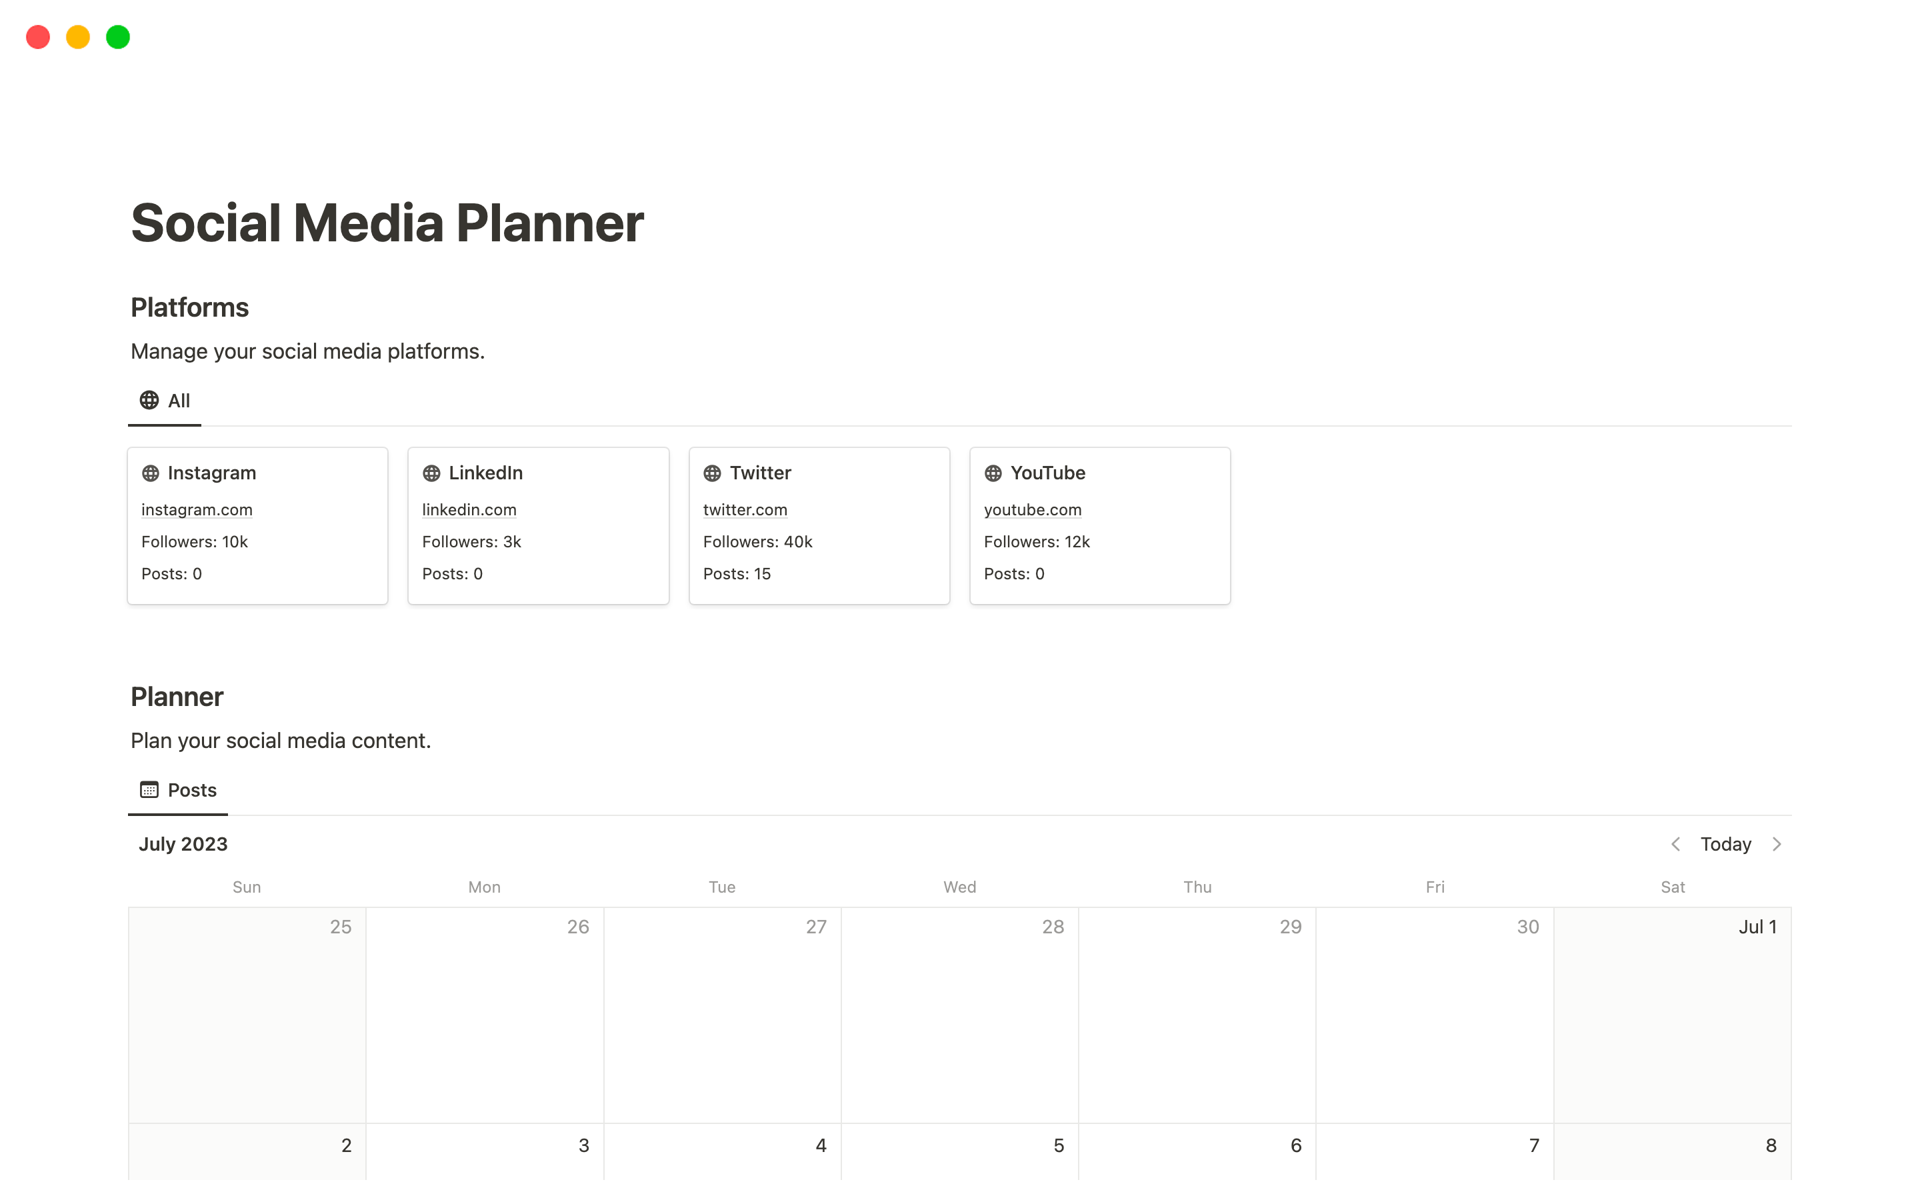 Simple social media planner to manage all your social media content.